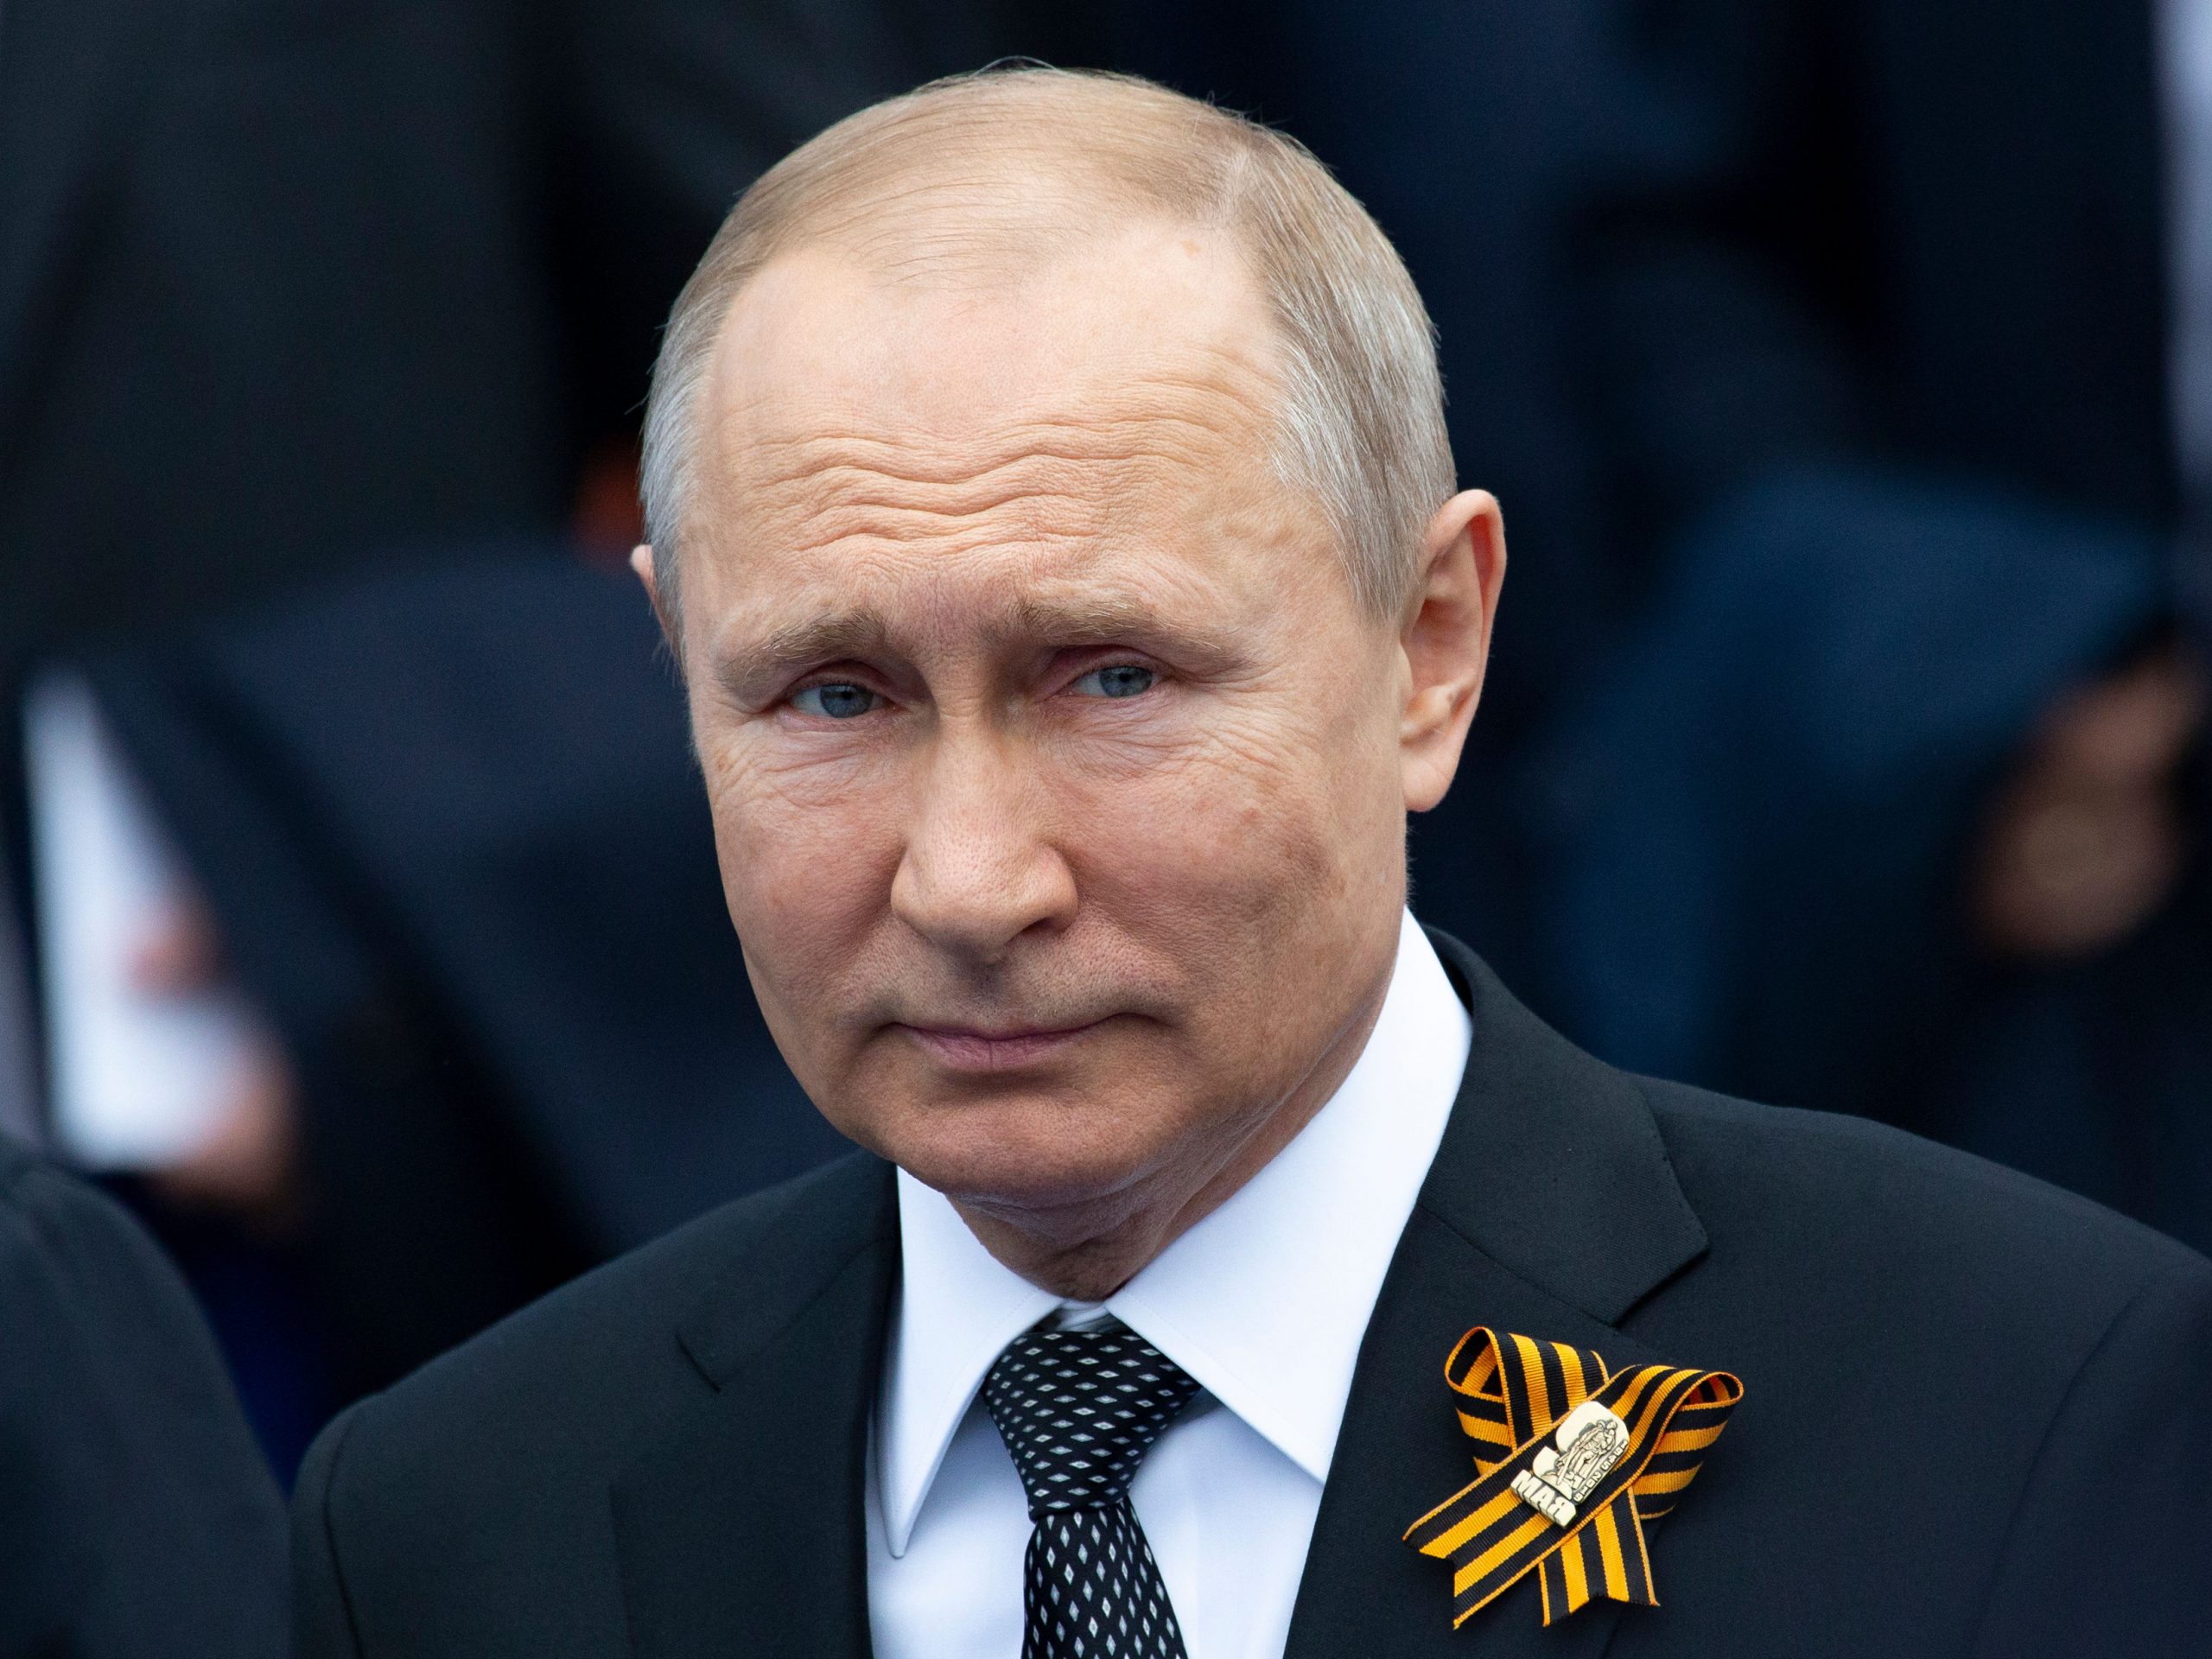 As Russia closes in on 100 days in Ukraine, Putin loses another close ally